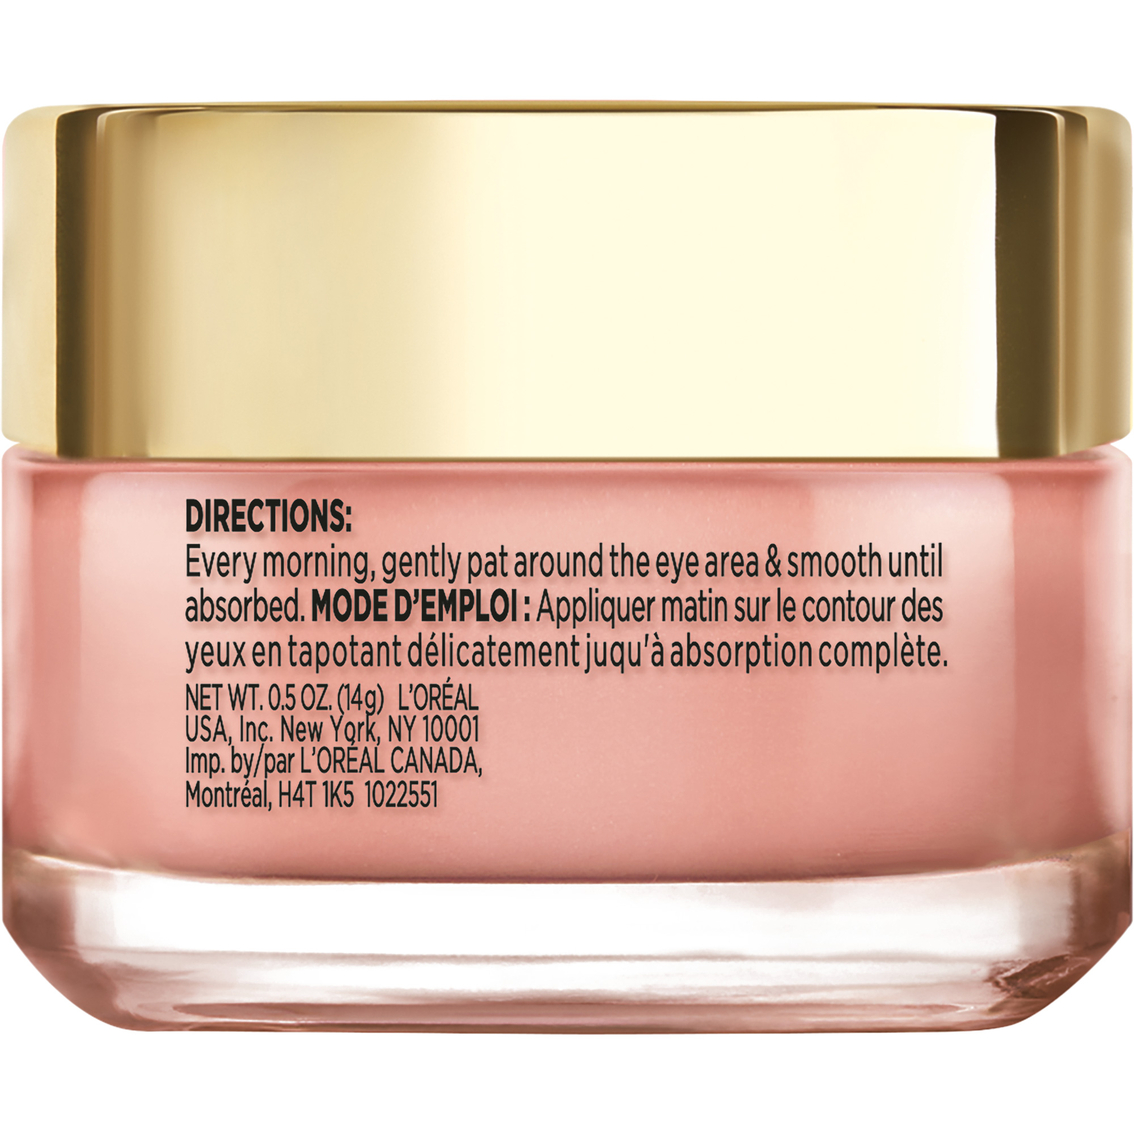 L'Oreal Age Perfect Rosy Tone Anti Aging Eye Brightener - Image 5 of 10